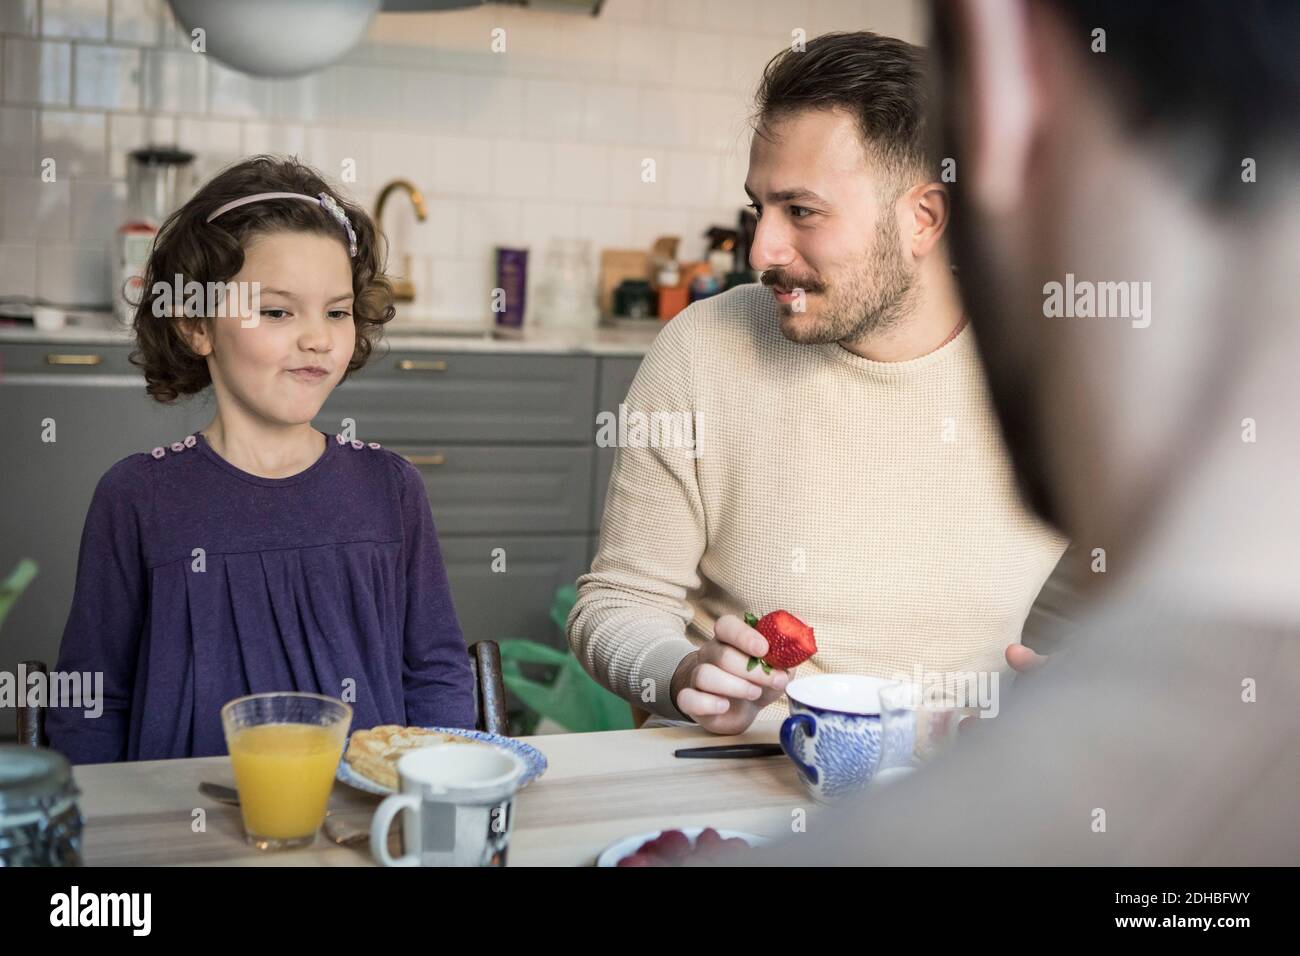 Father looking at daughter while having breakfast in kitchen Stock Photo